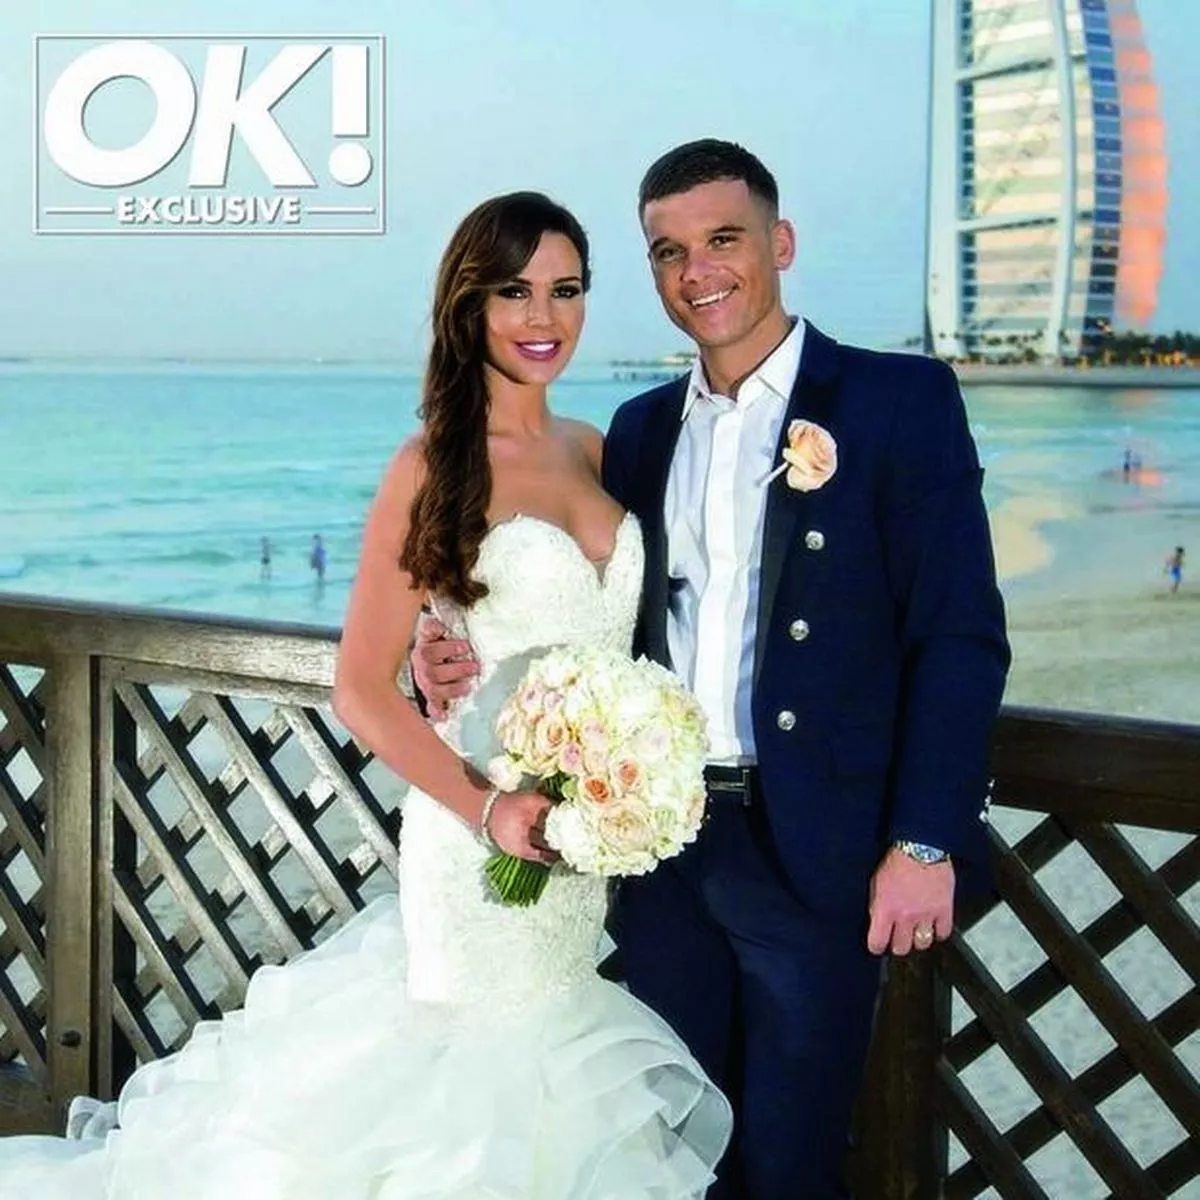 Who is Danielle Lloyd Married to